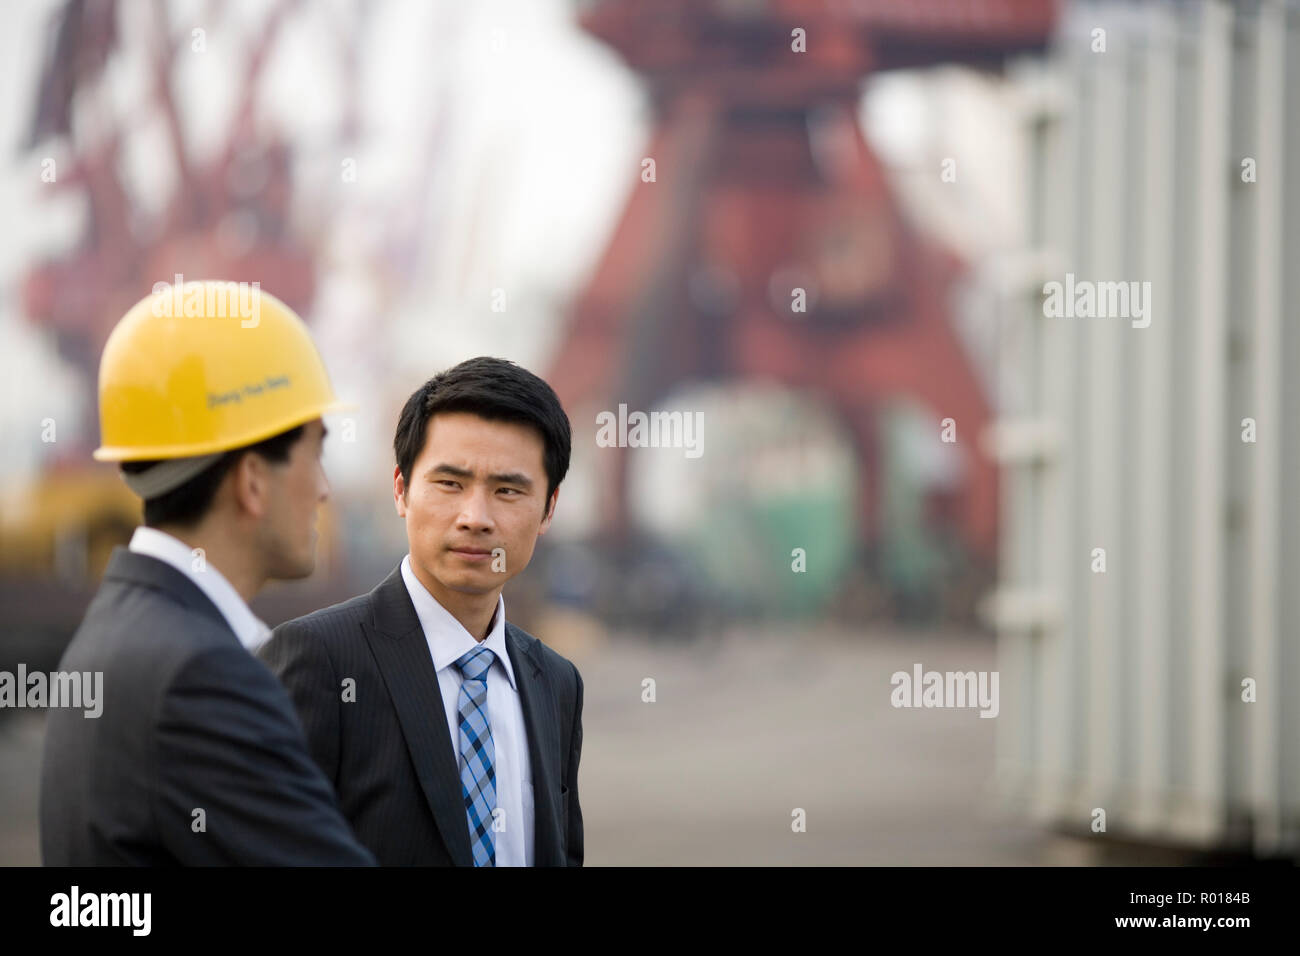 Young adult businessman standing with a mid-adult colleague on a shipping dock. Stock Photo